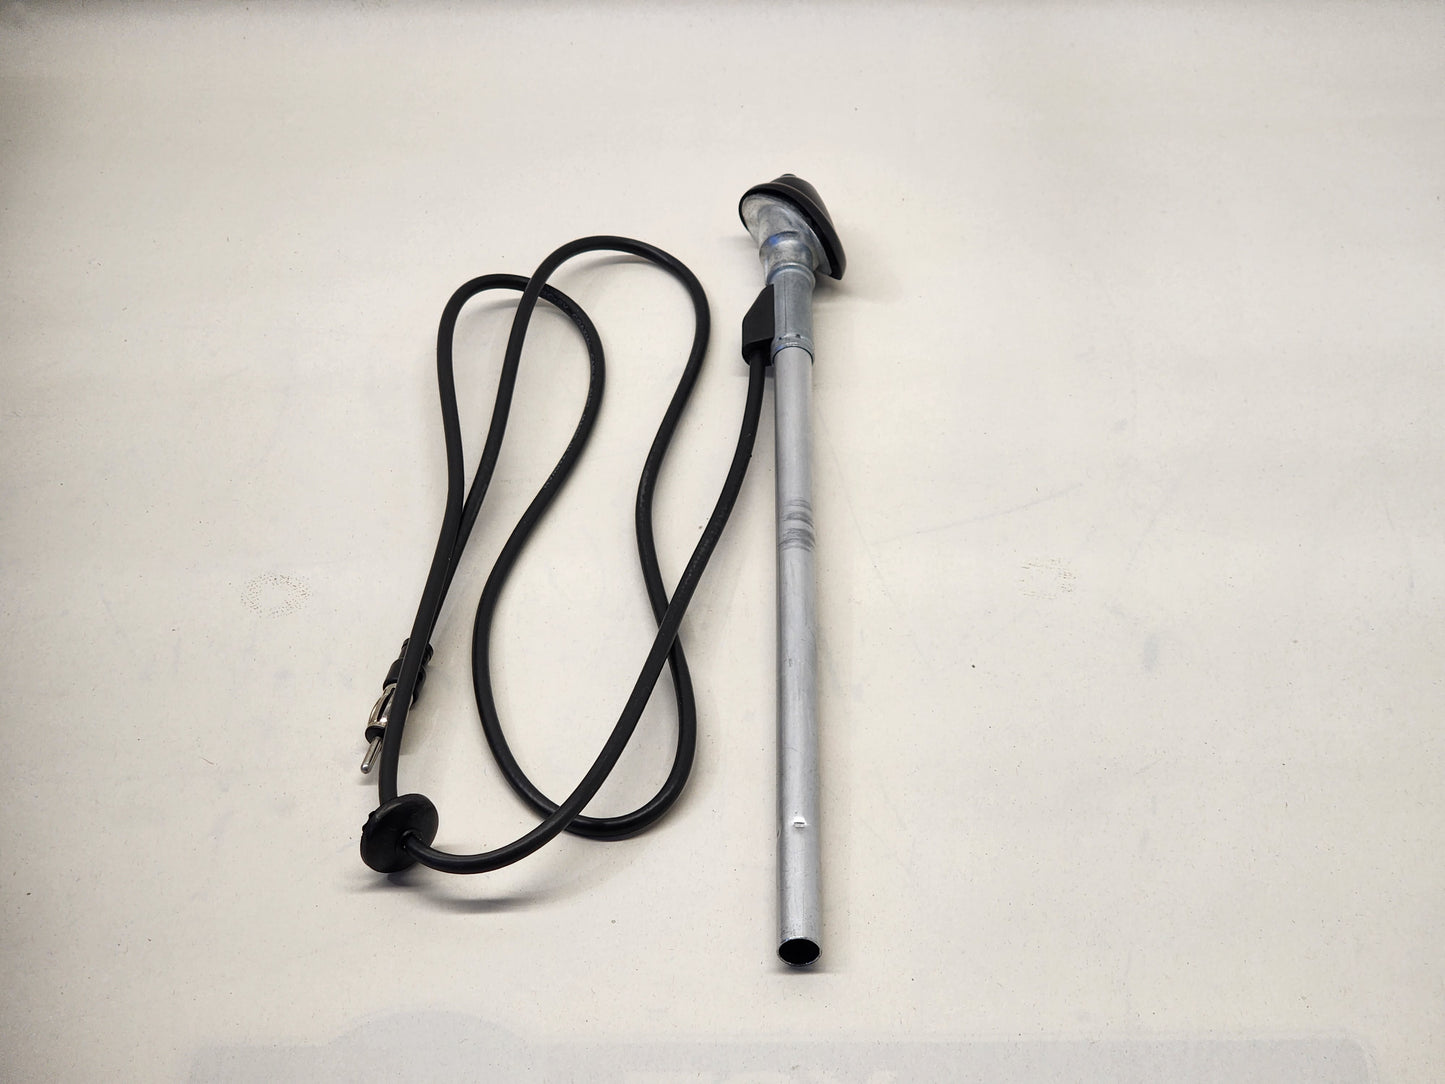 Radio Antenna - Suit Hilux LN106/7 and Surf 130 (Manual Type)